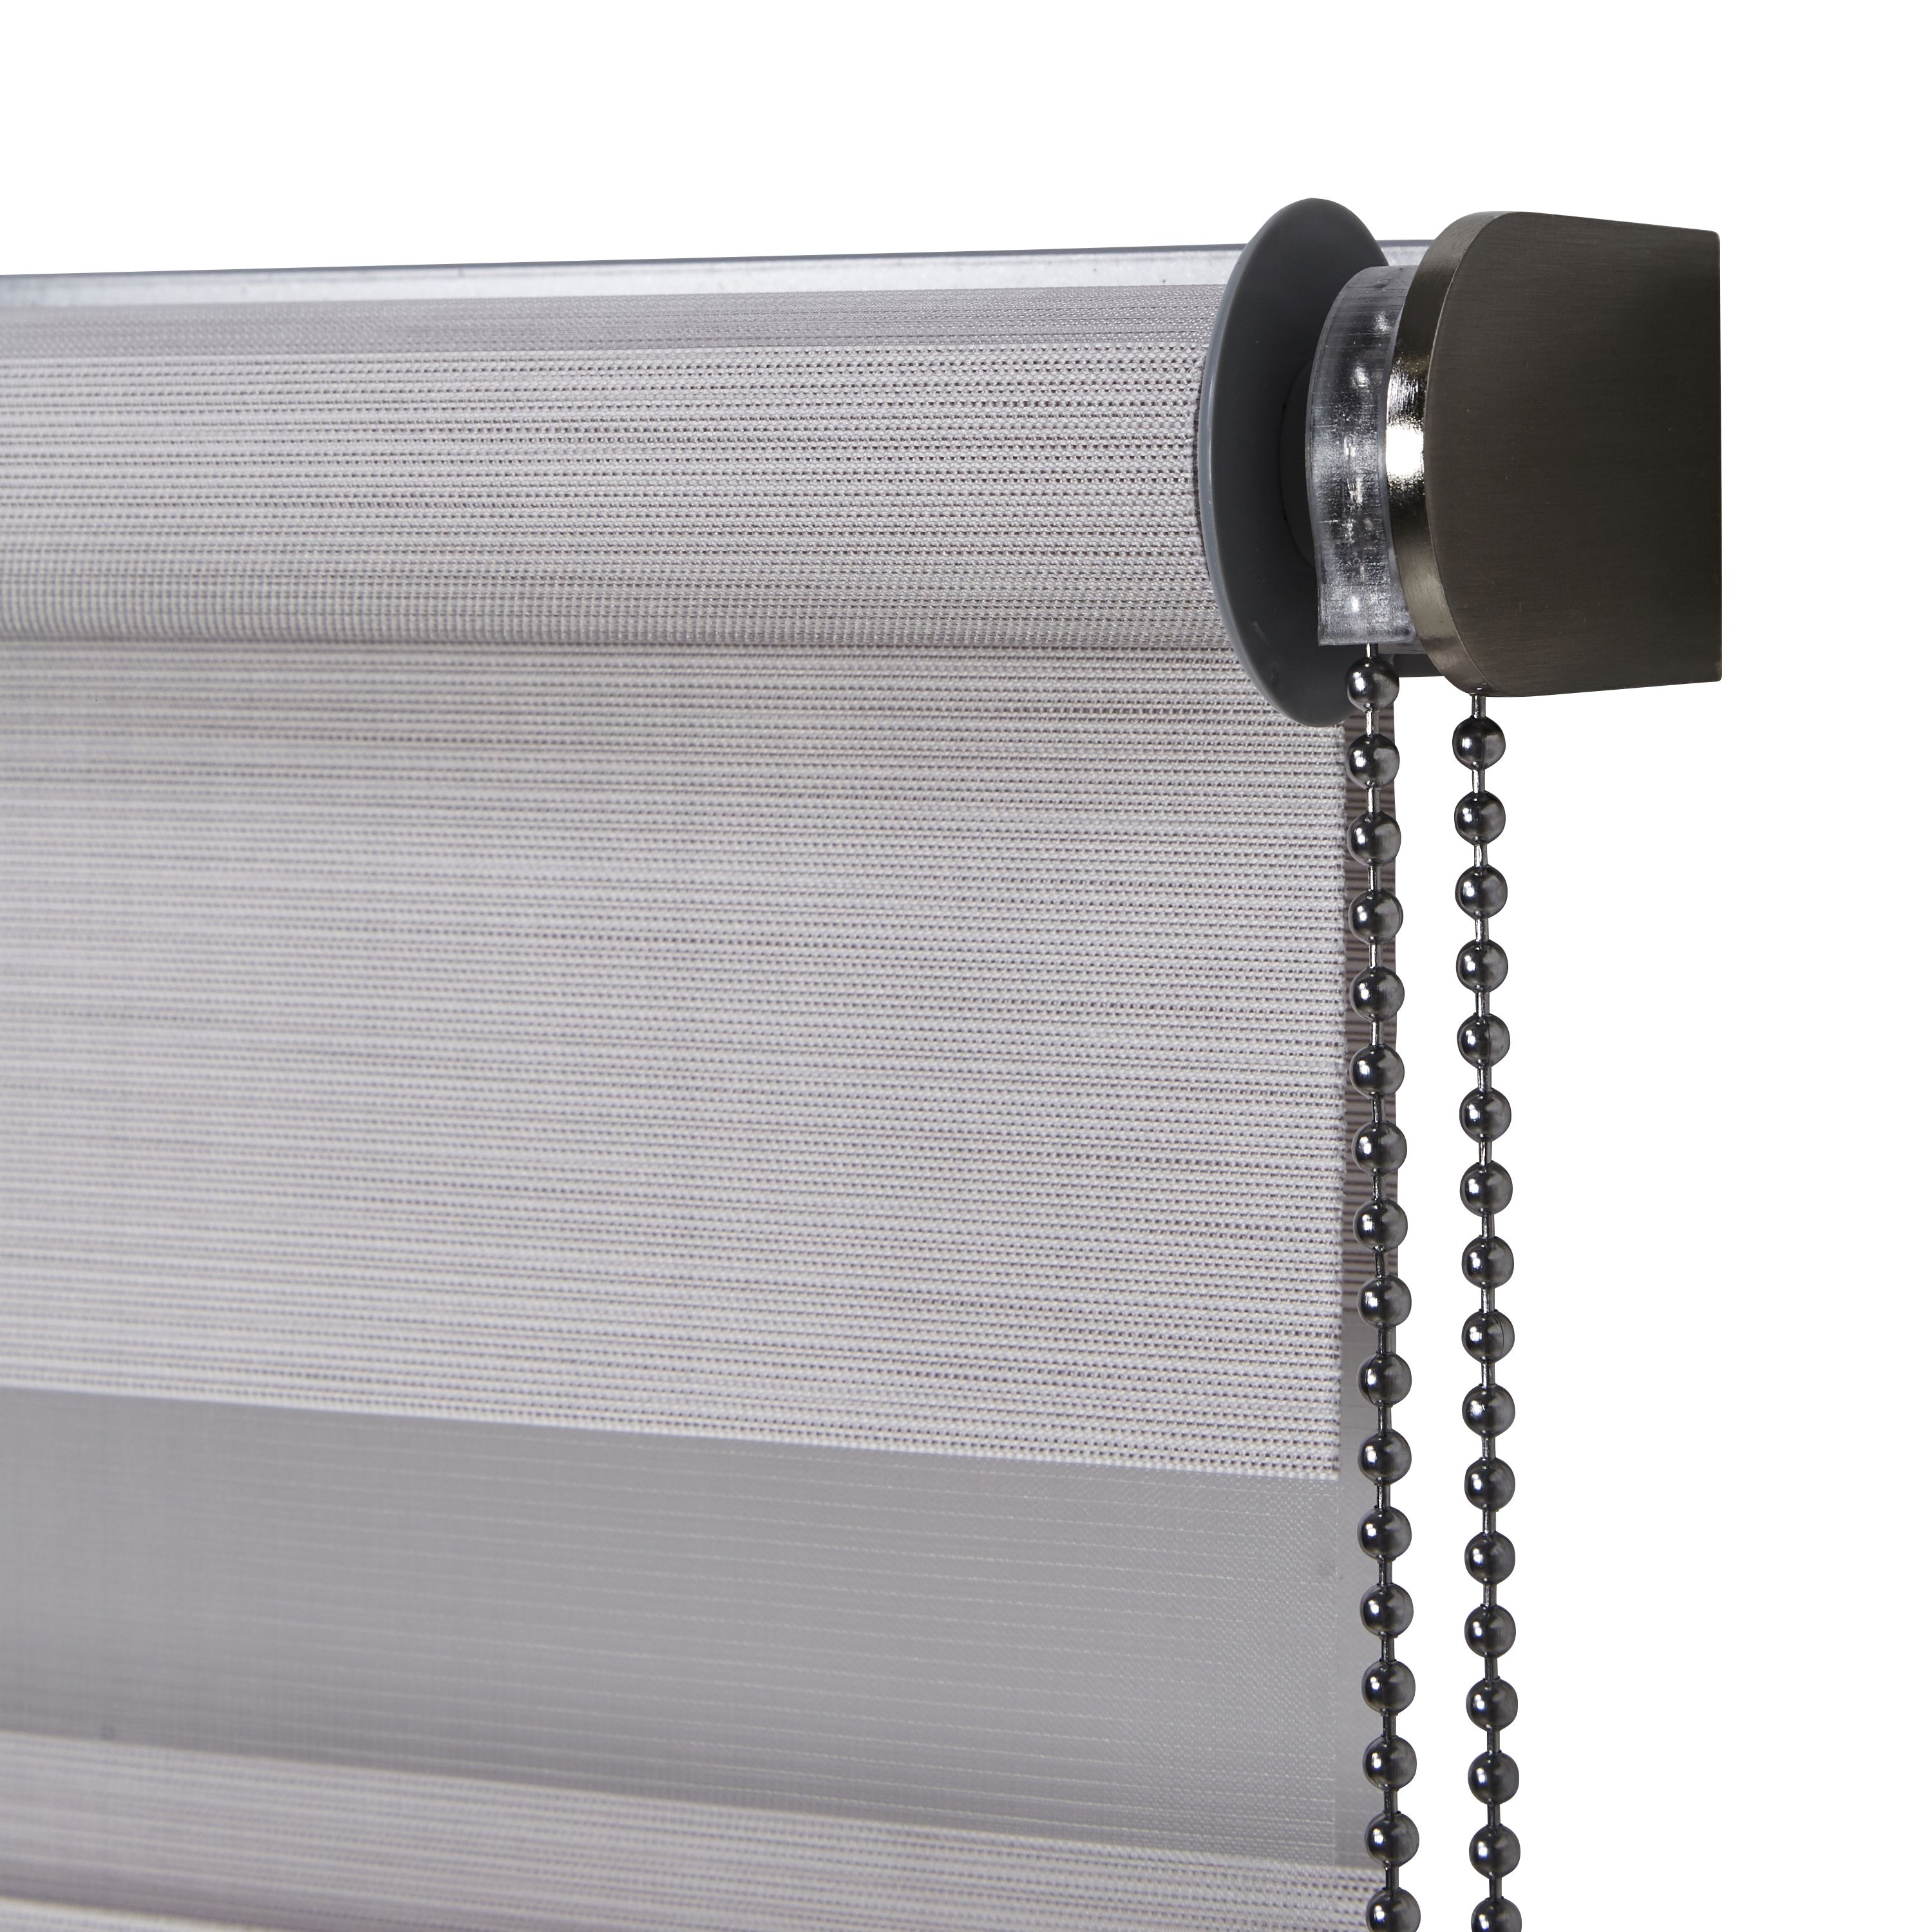 Kala Corded Natural Striped Day & night Roller blind (W)180cm (L)180cm